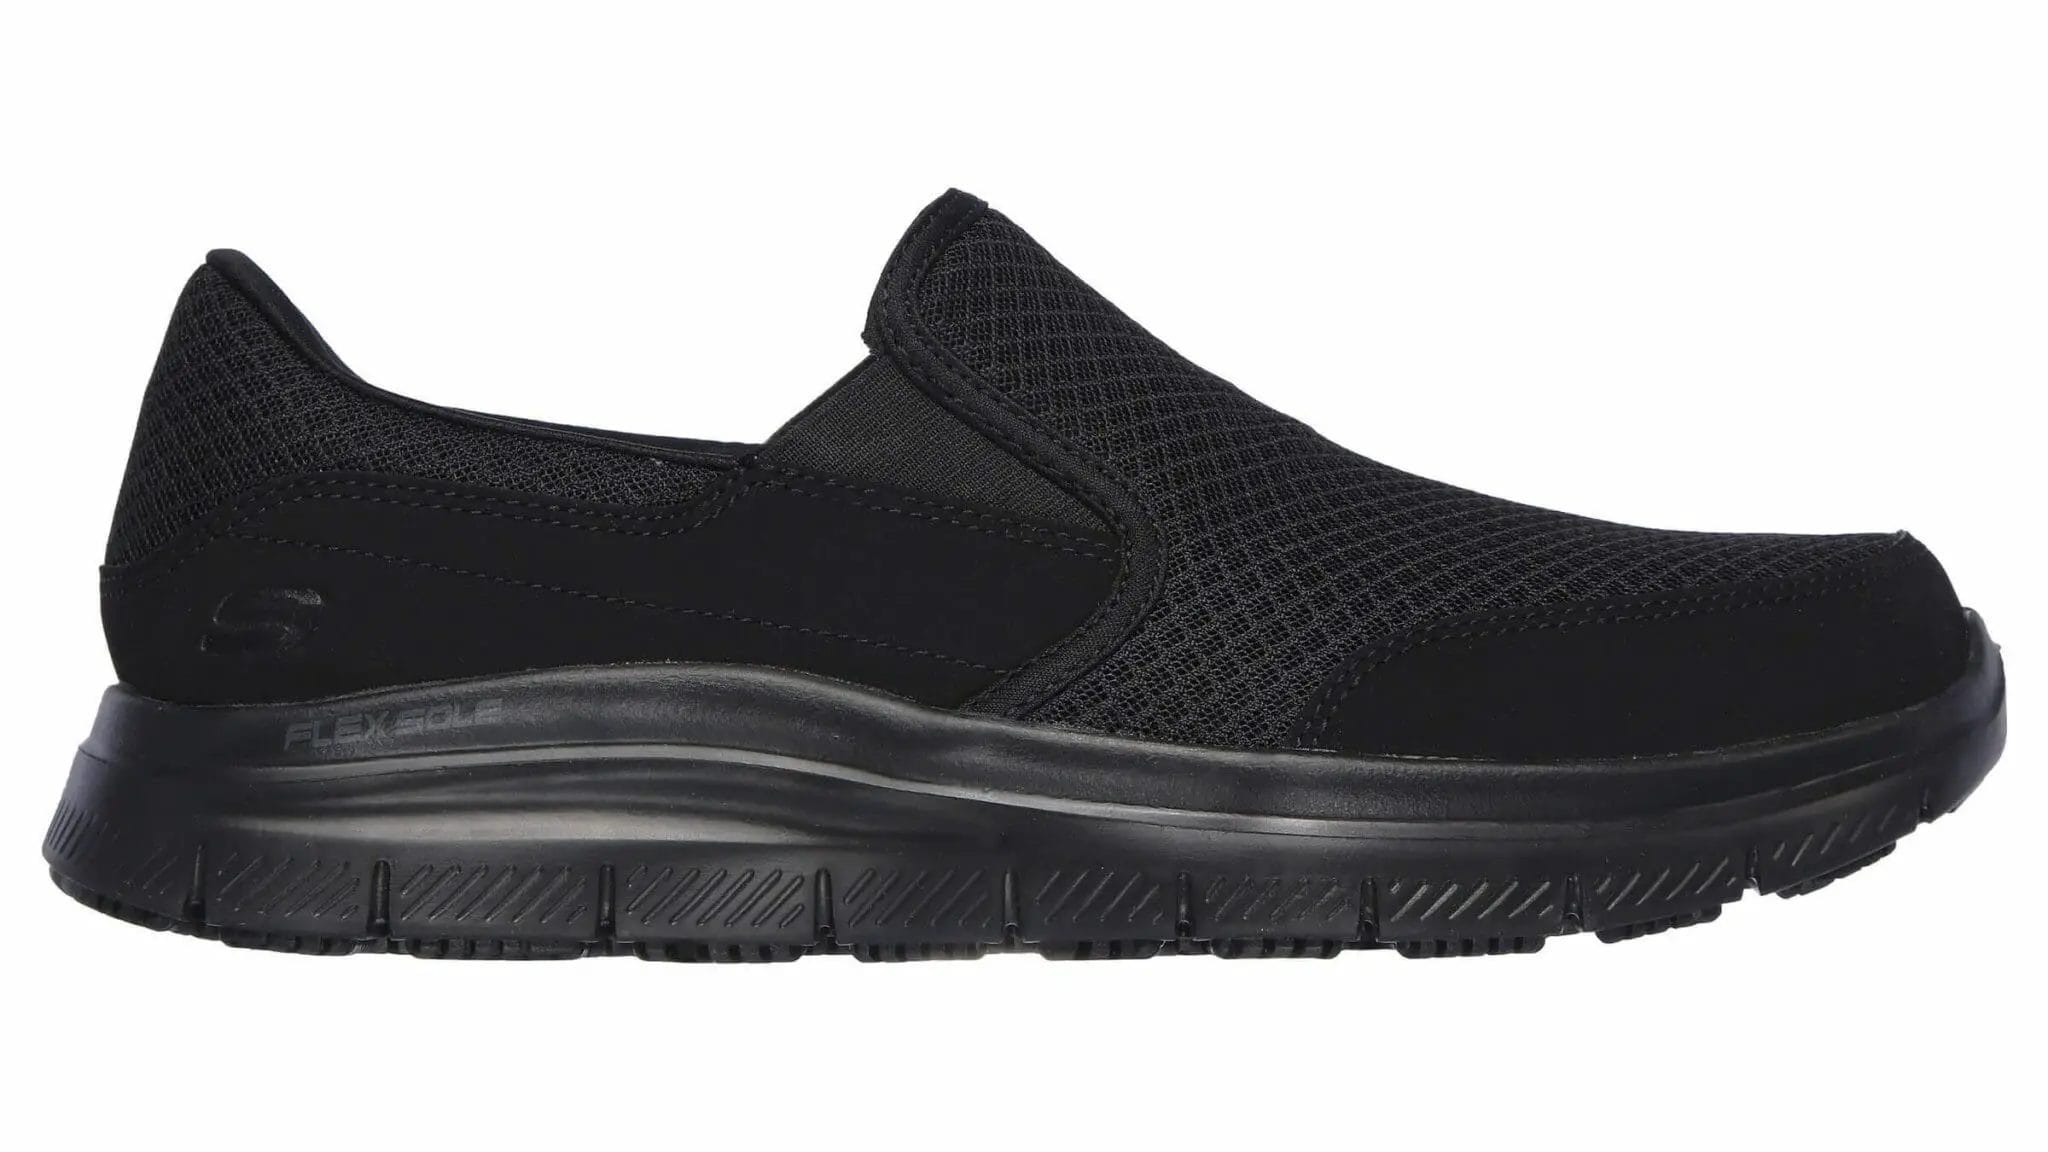 Skechers flex advantage McAllen best mesh chef shoes for maximum comfort and keeping feet cool in the kitchen.